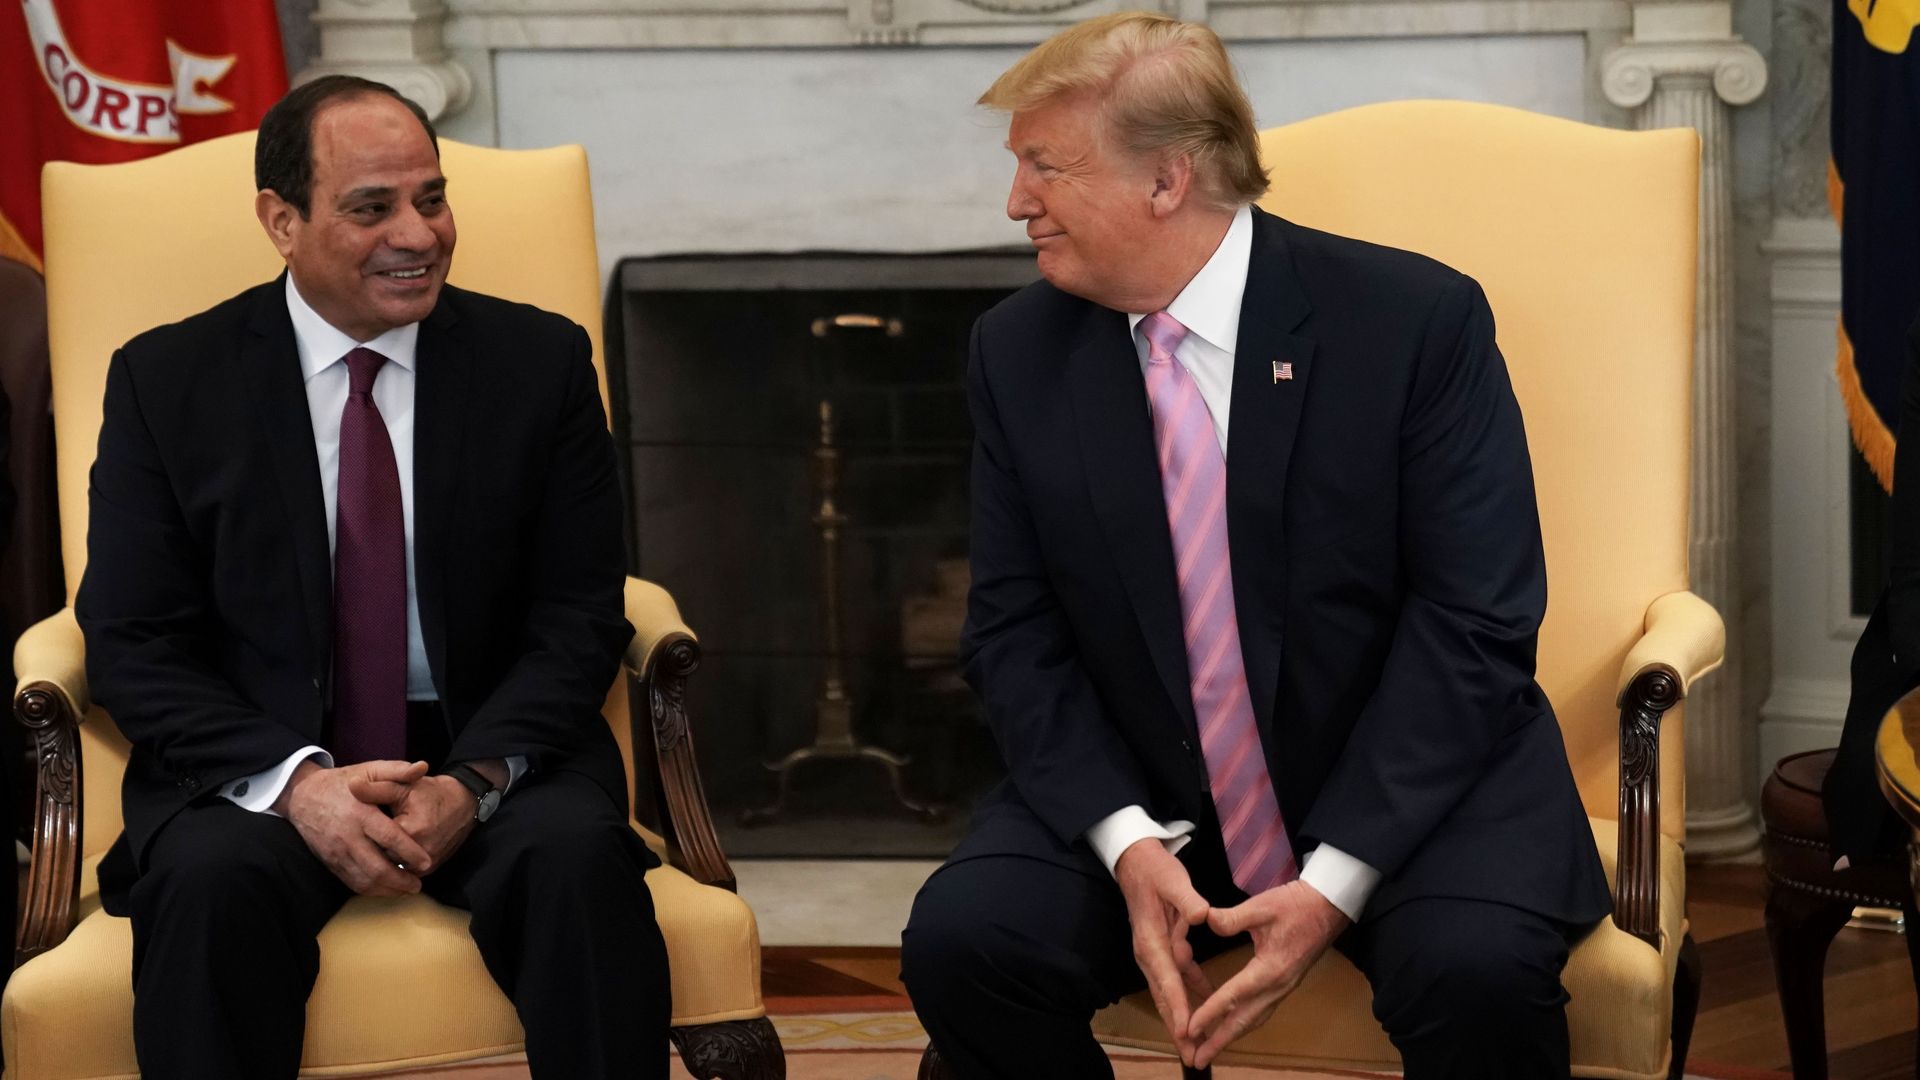 In this image, Trump sits on the right next to Abdel Fattah el-Sisi of Egypt. Trump turns to face Abdel and is smiling at him.